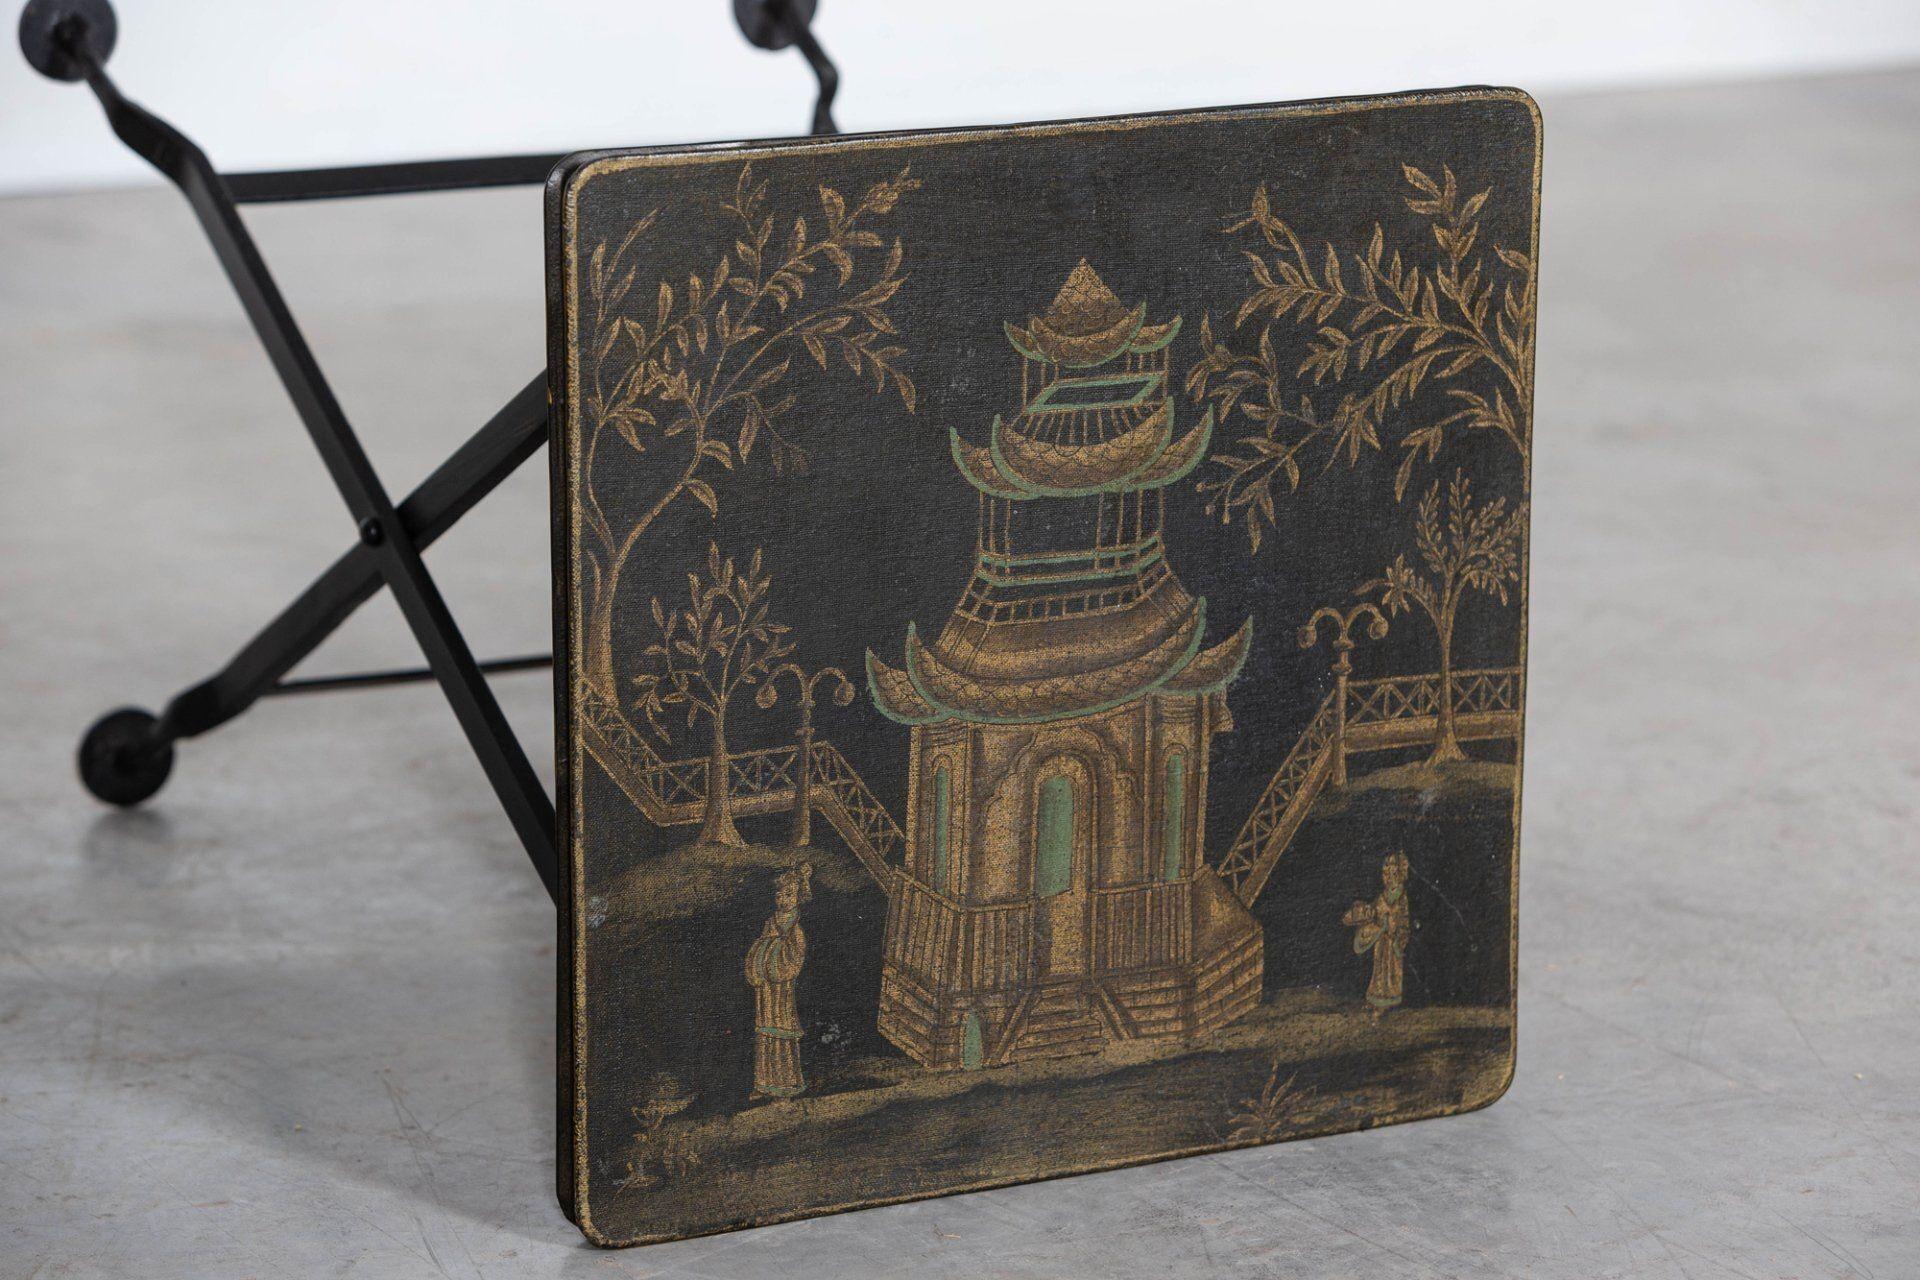 Circa 1950
Chinoiserie folding iron side table.
sku 1229
Measures: W40 x D40 x H61 cm.